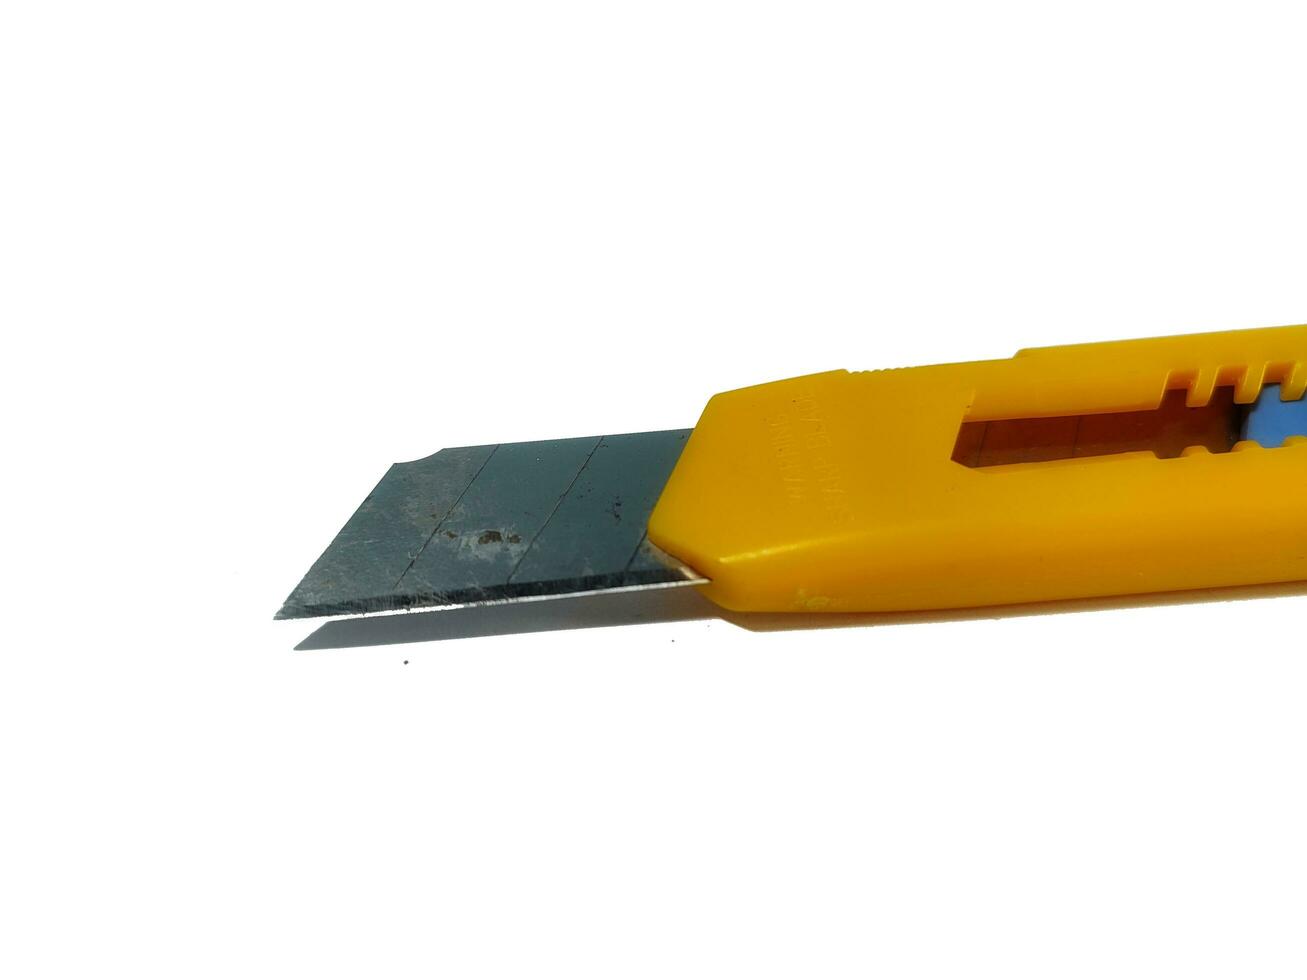 Cutter blade with yellow handle isolated on white background. Sharper object to cut paper photo